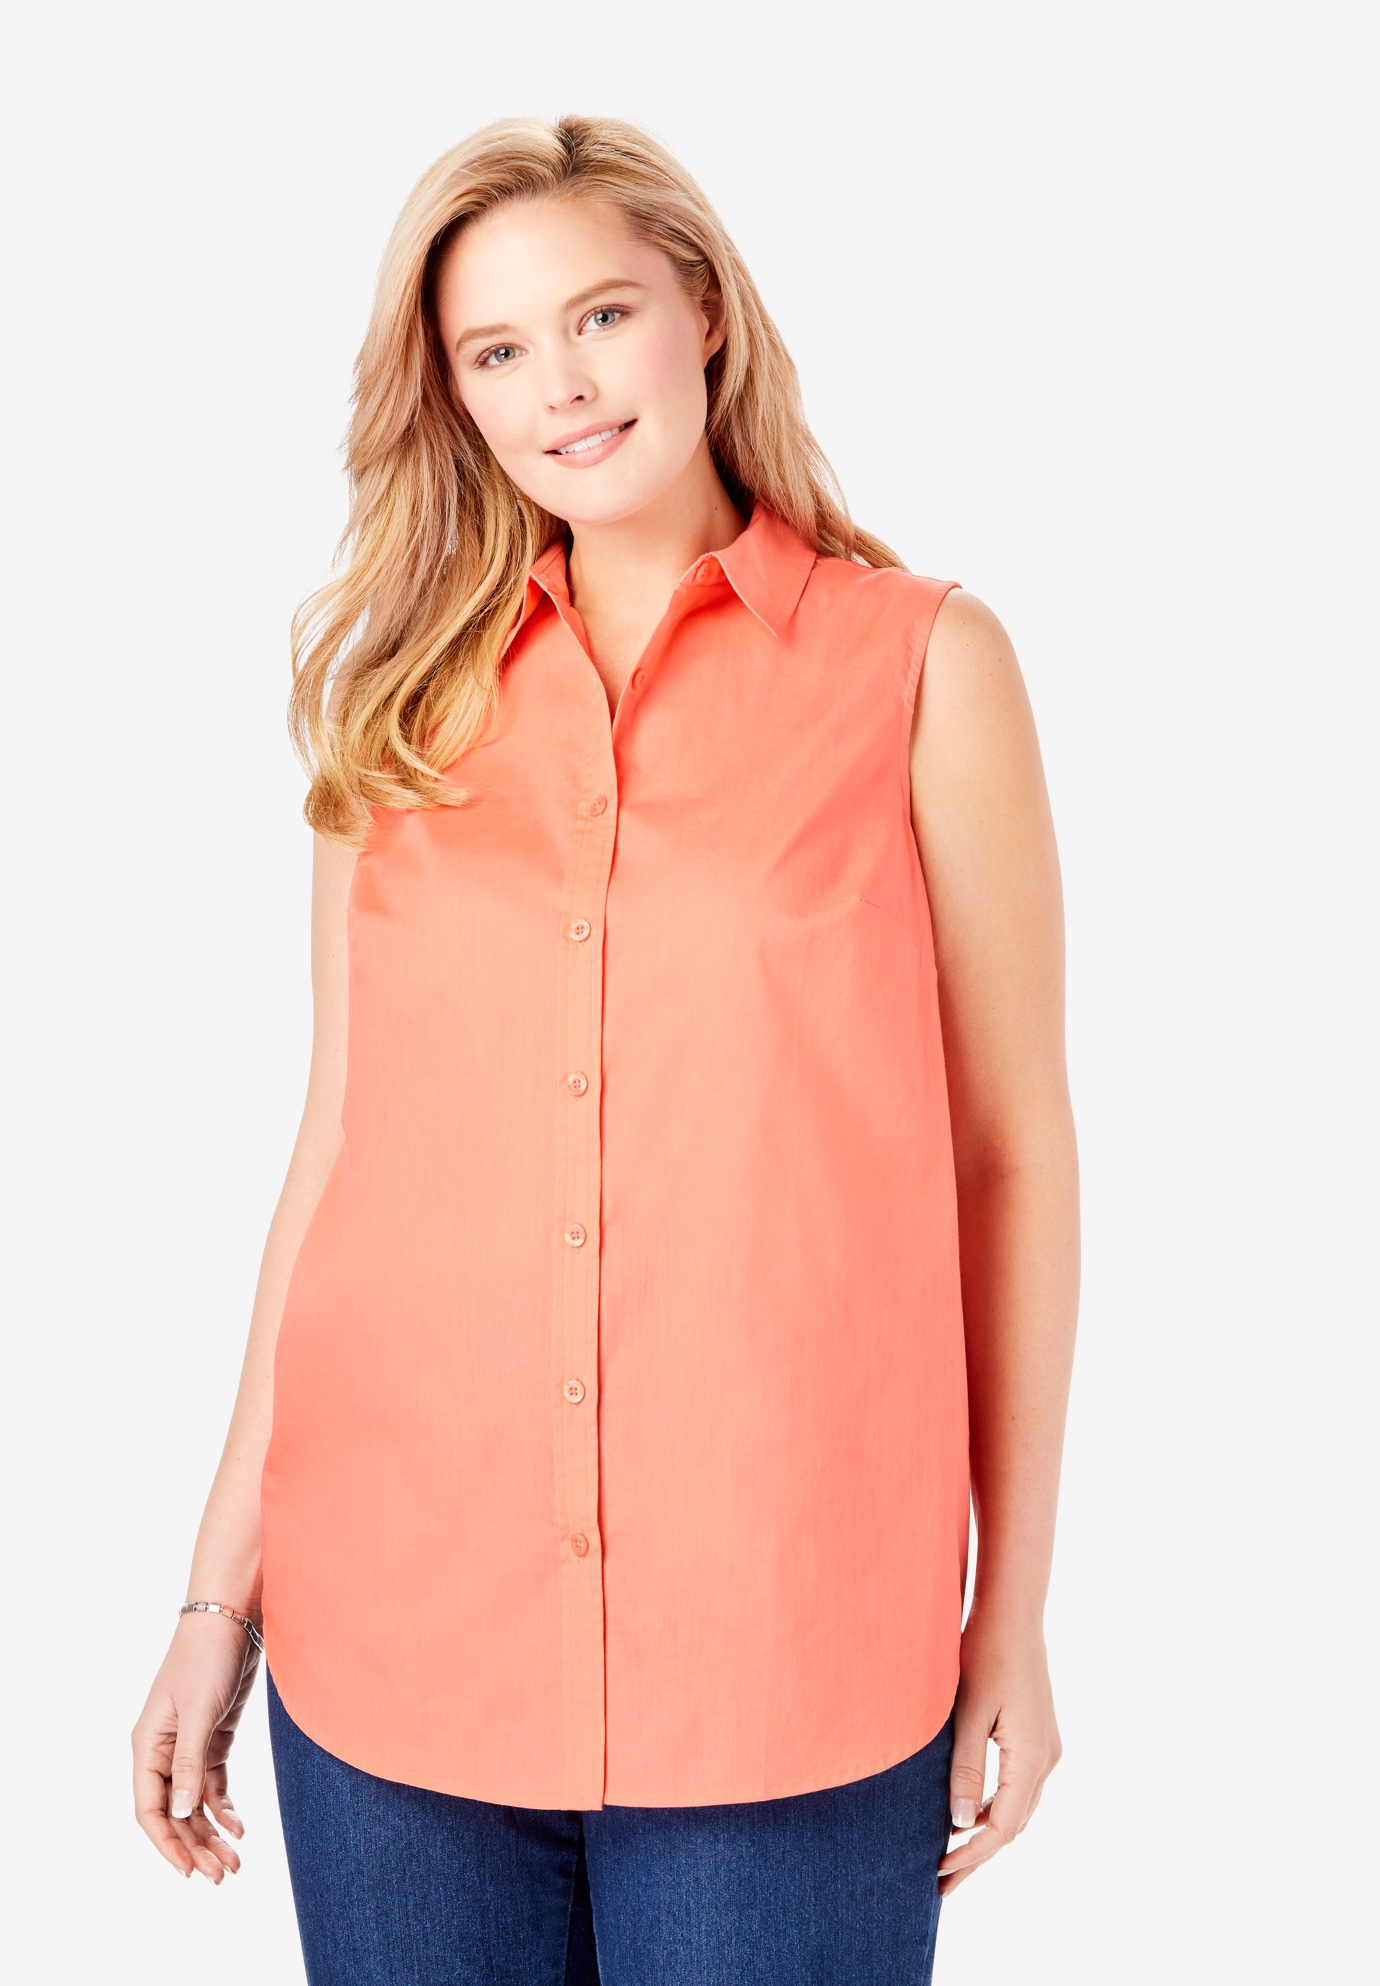 Perfect Button Down Sleeveless Shirt | Woman Within